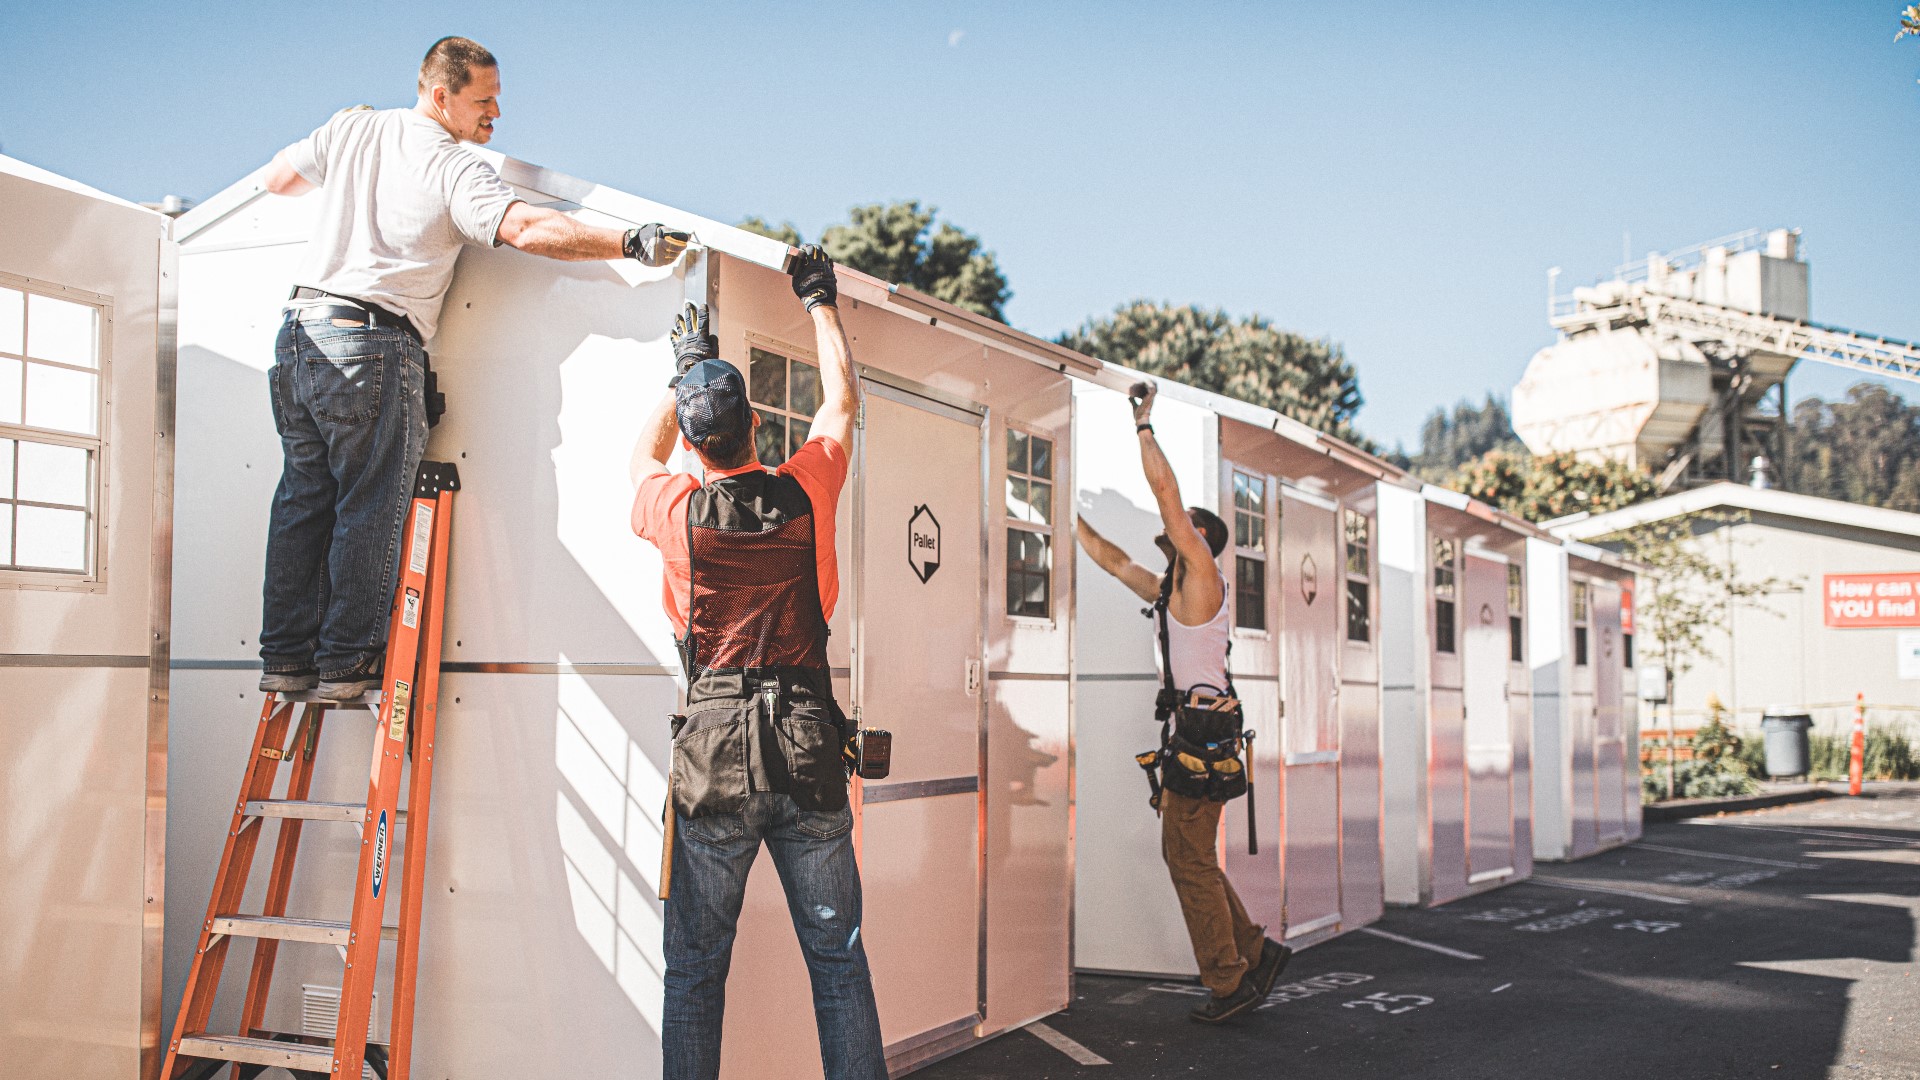 Pallet is tackling homelessness head-on by employing once homeless people to build the safe, durable, climate-controlled shelters.